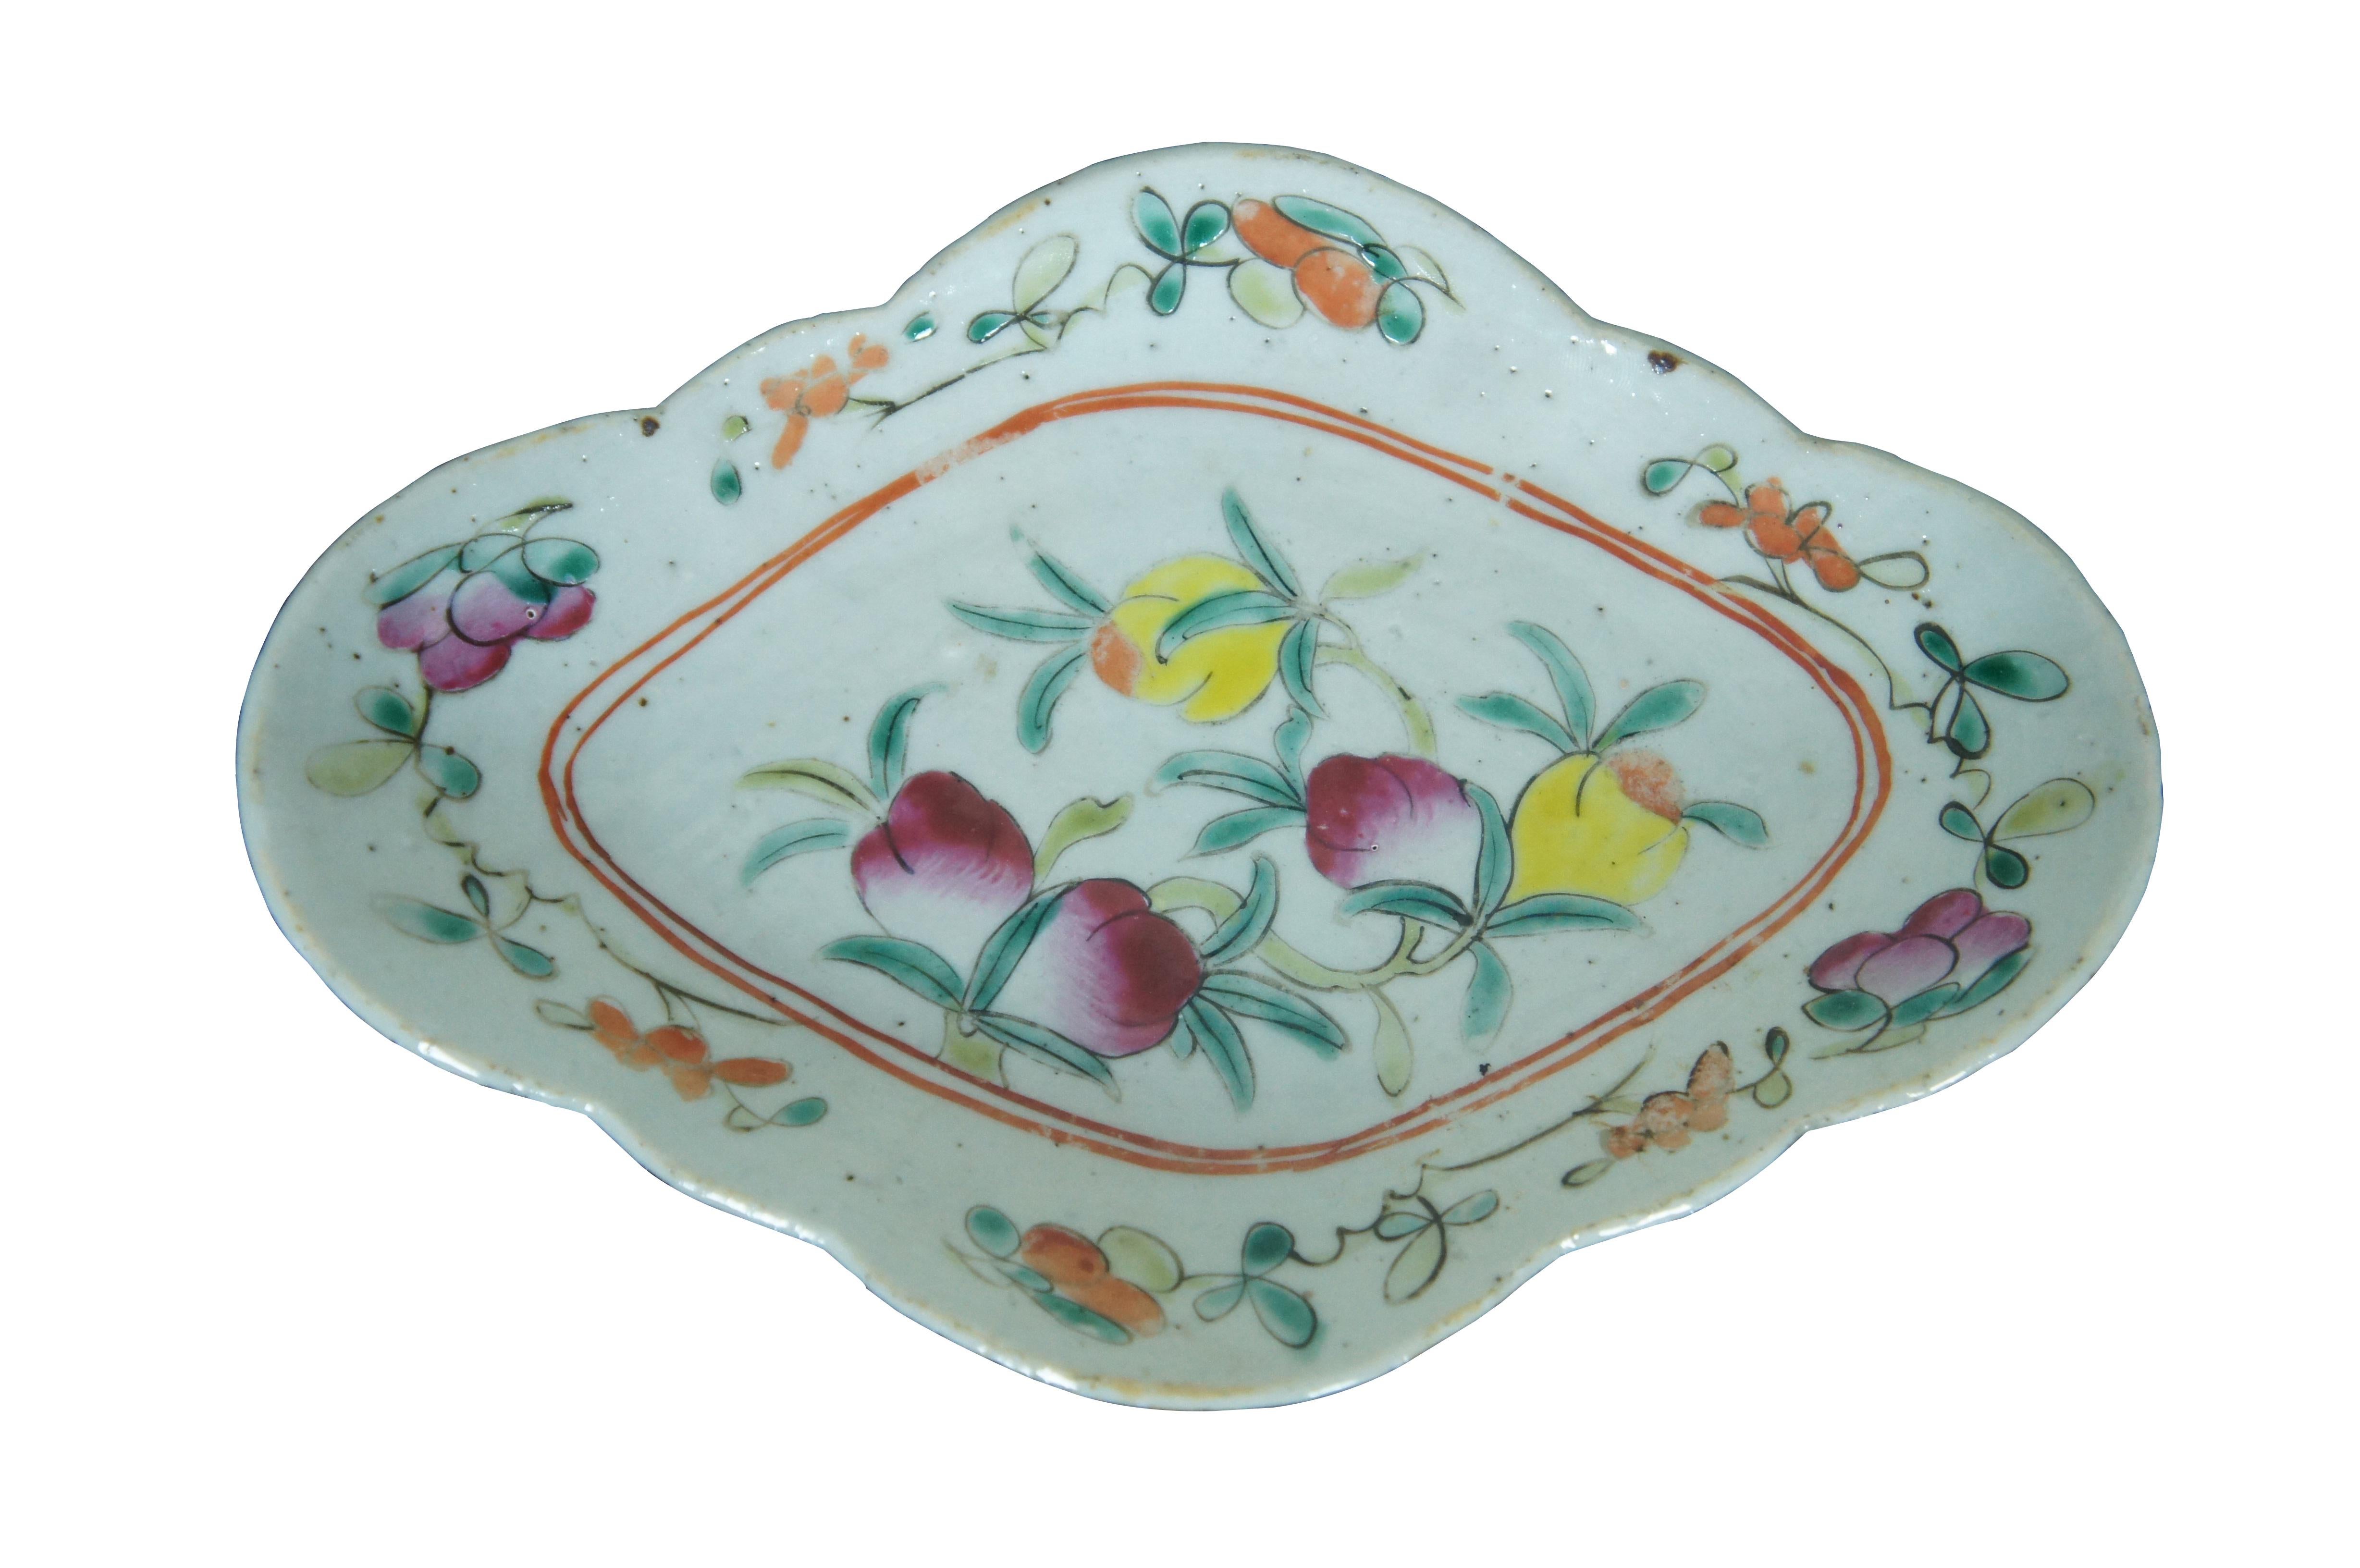 Antique early 20th century Chinese famille rose porcelain tazza / chop suey / footed altar dish with a scalloped oval edge, decorated with pink, orange and yellow flowers.

Dimensions:
9